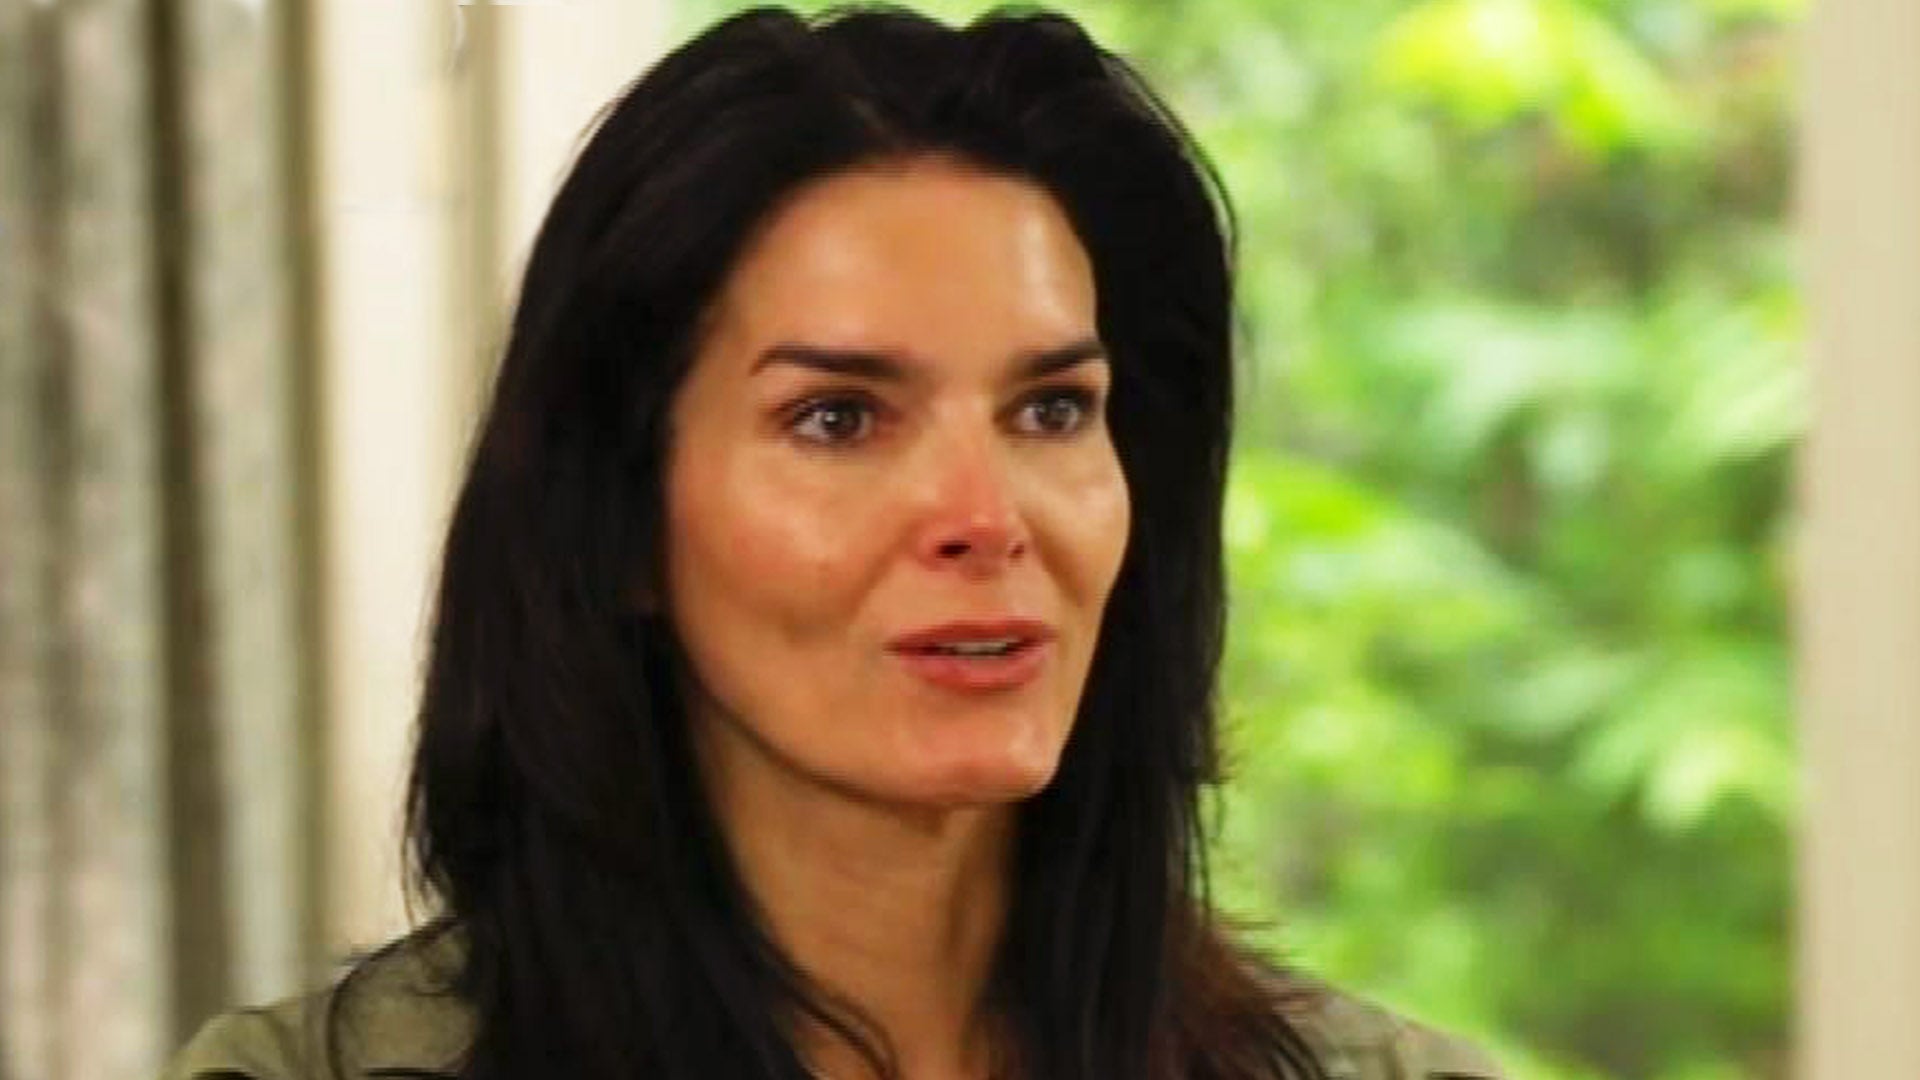 Angie Harmon Files Lawsuit Against Instacart After Shopper Killed Her Dog